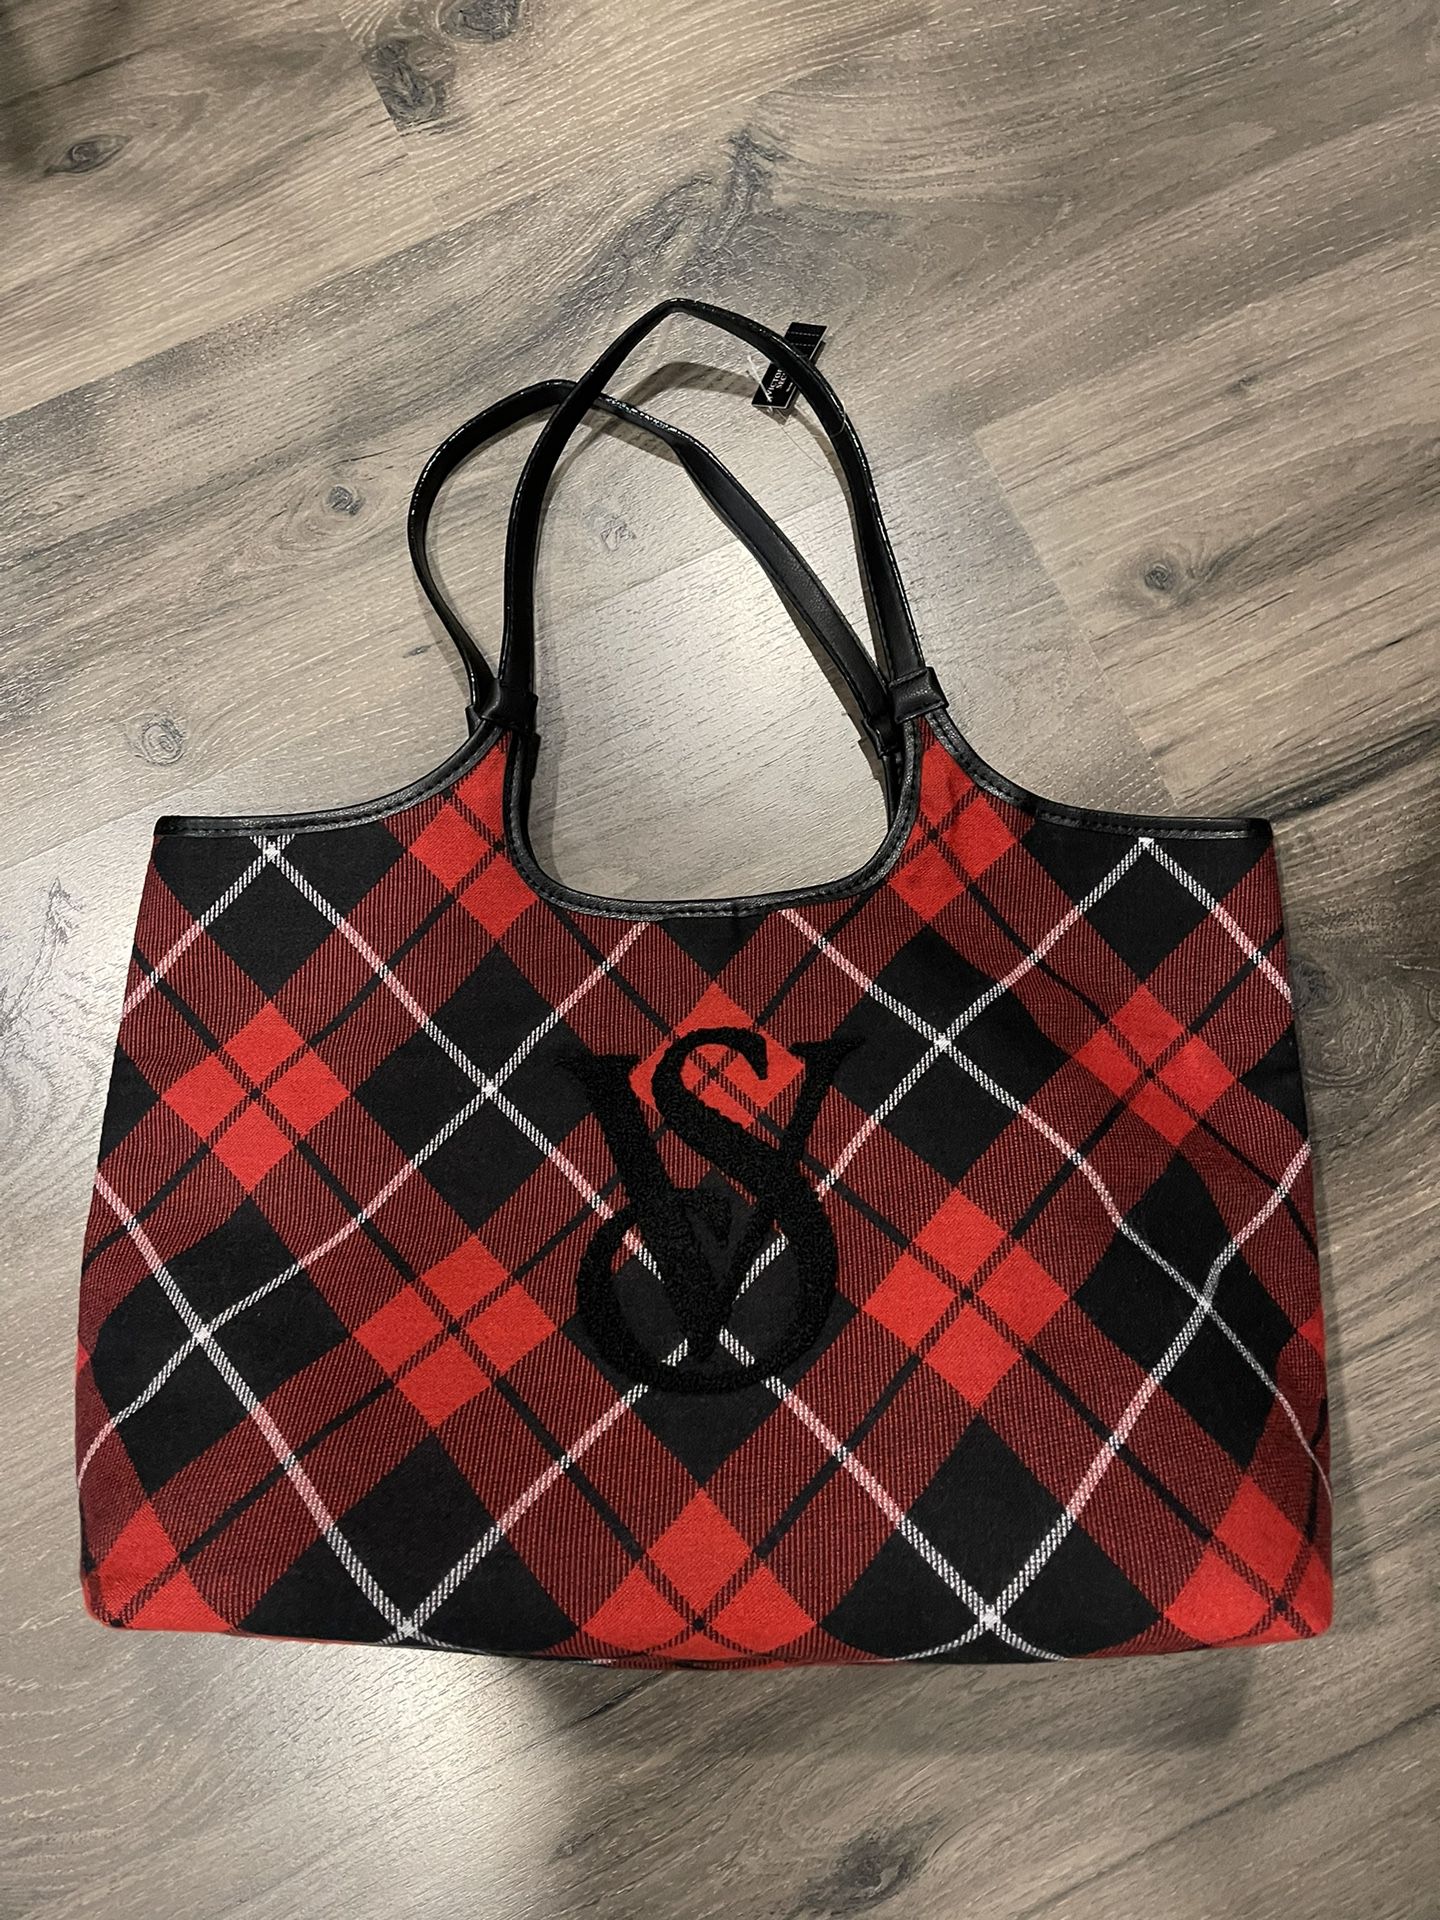 New Victoria's Secret Tote Bag Plaid Red & Black With Sherpa Christmas. NWT